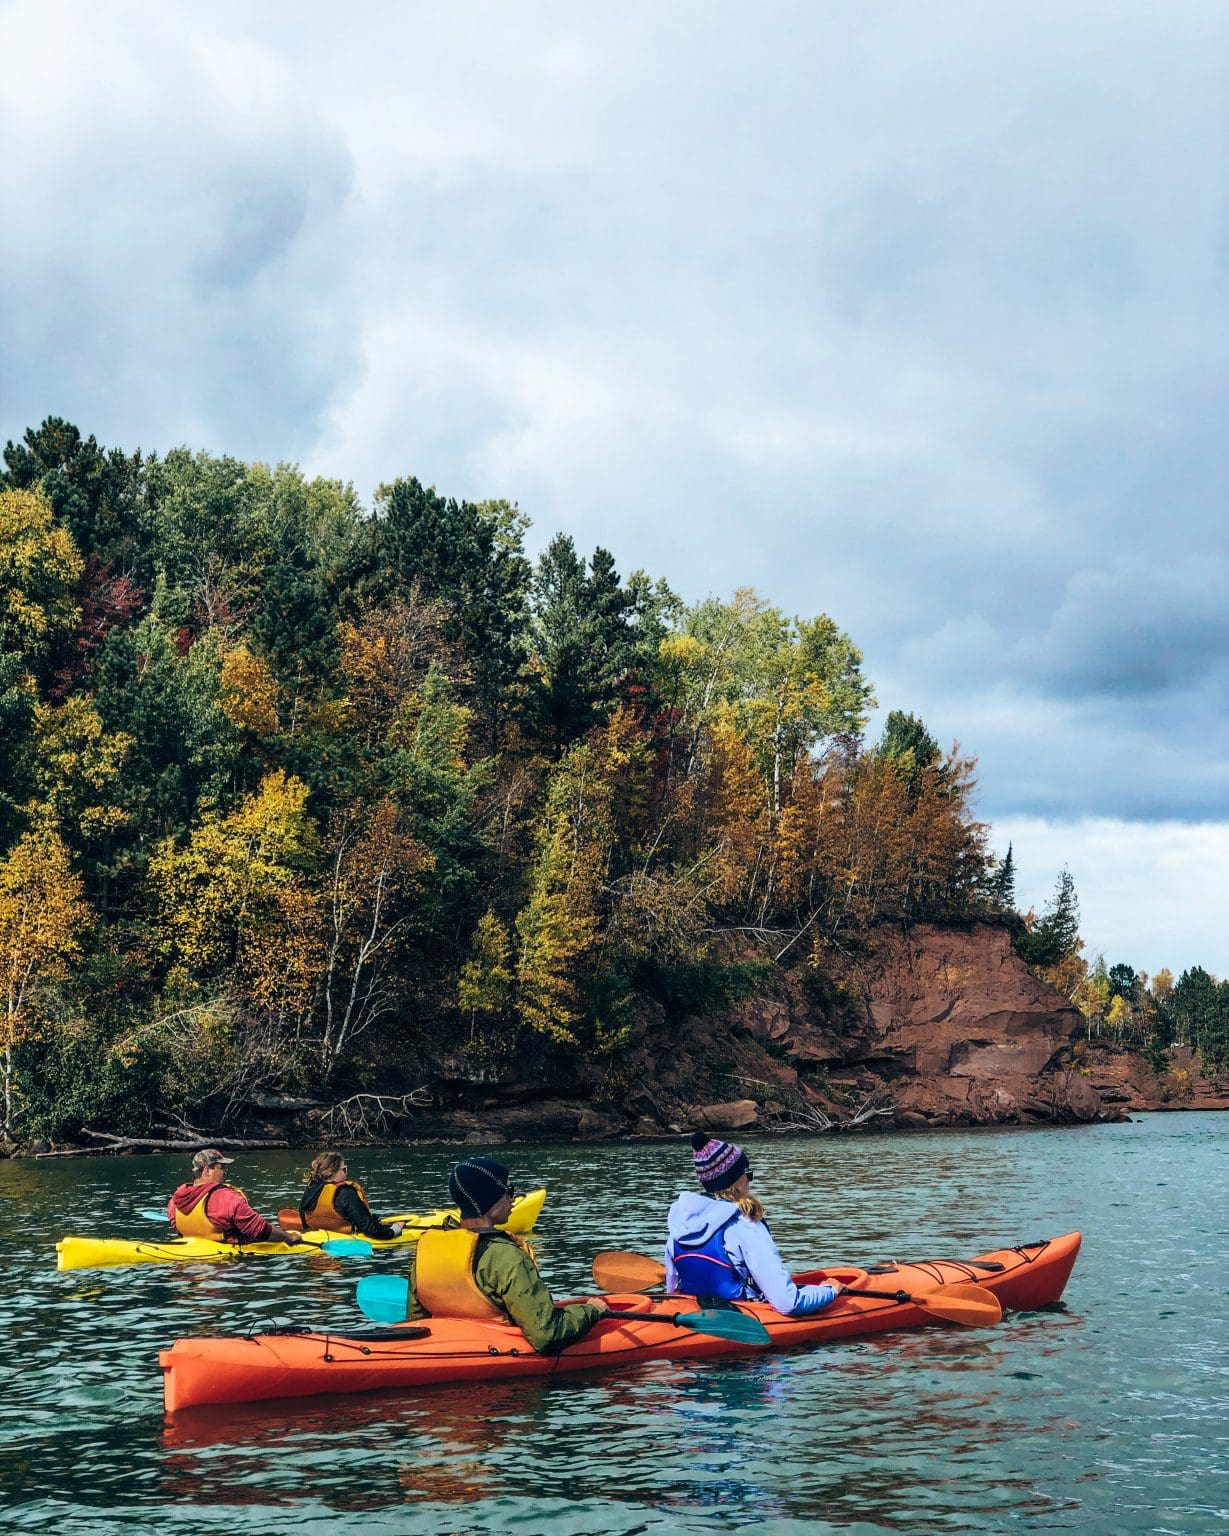 10 Things To Do in Bayfield Wisconsin For The Perfect Weekend Getaway